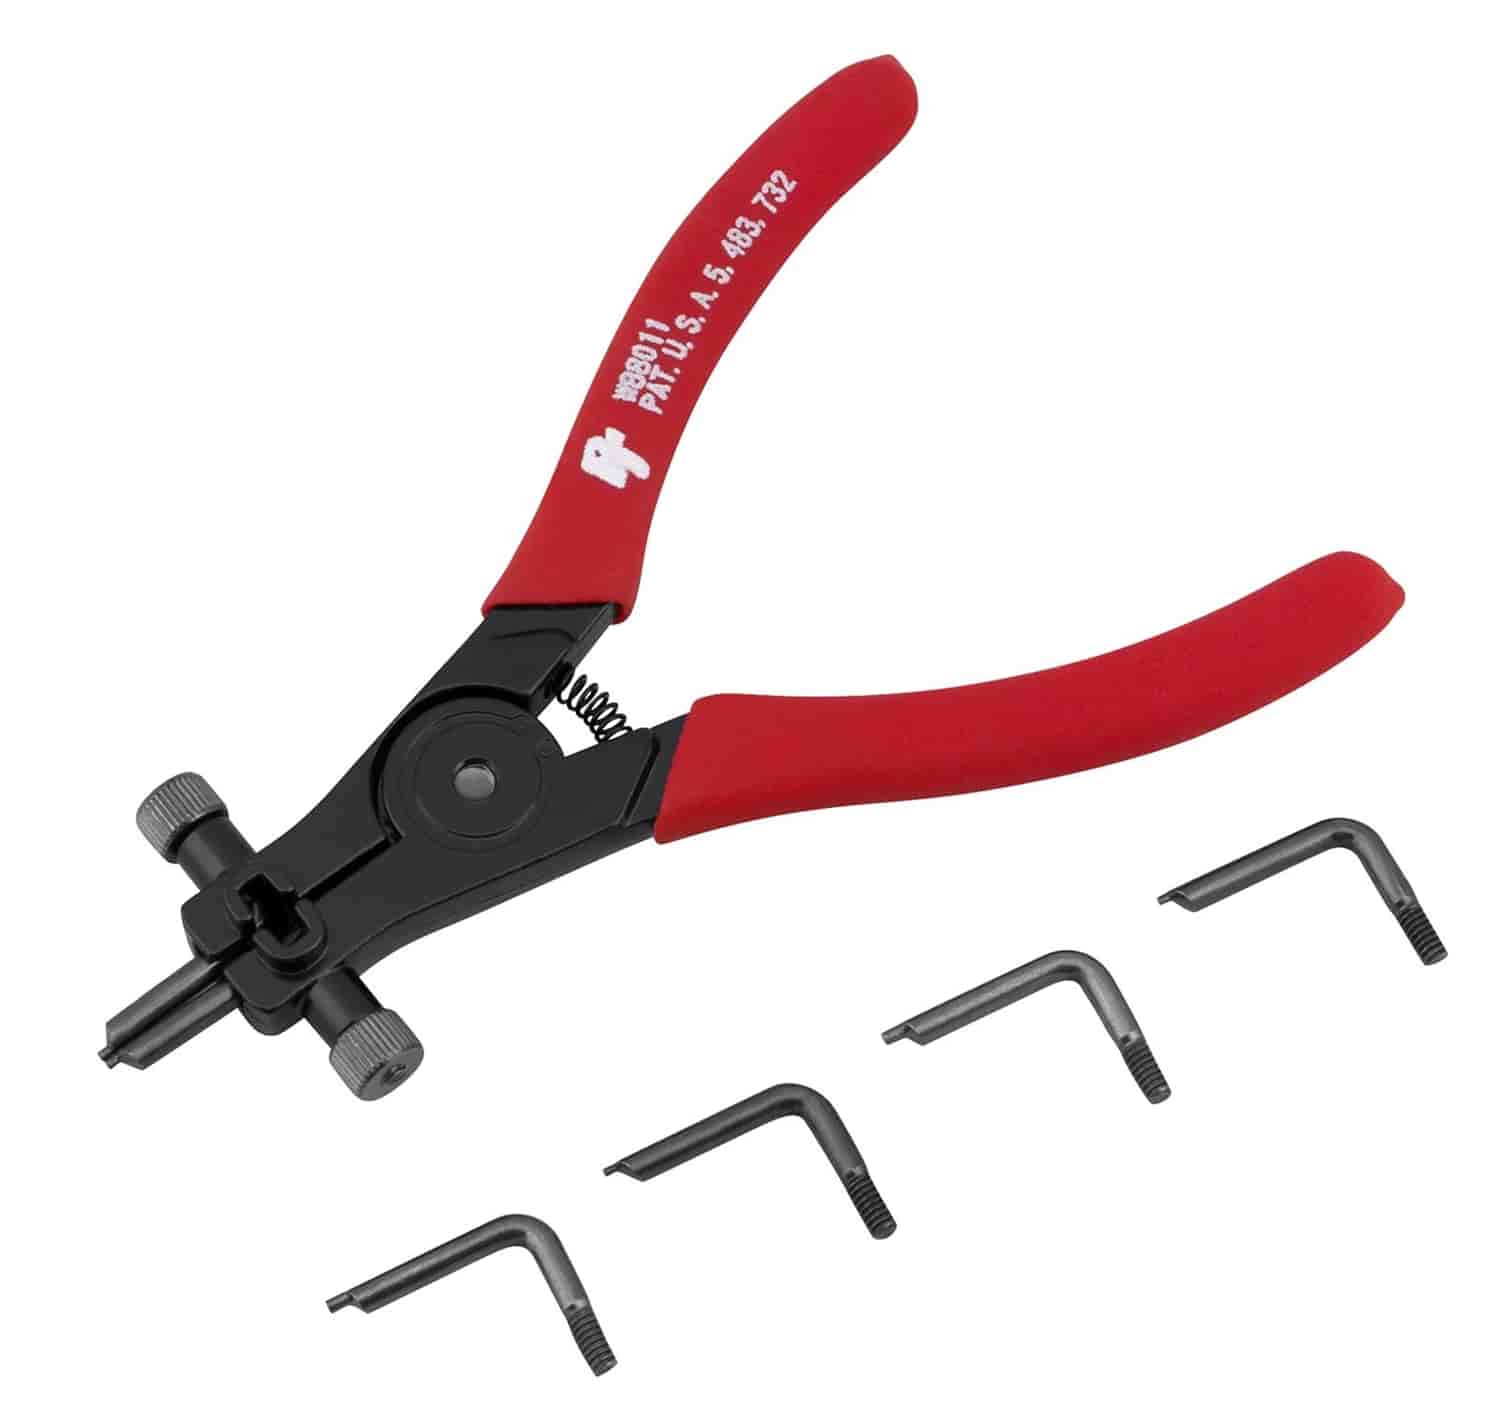 Adjustable External Snap Ring Plier Tip Sizes: 1.0mm, 1.5mm and 2.0mm